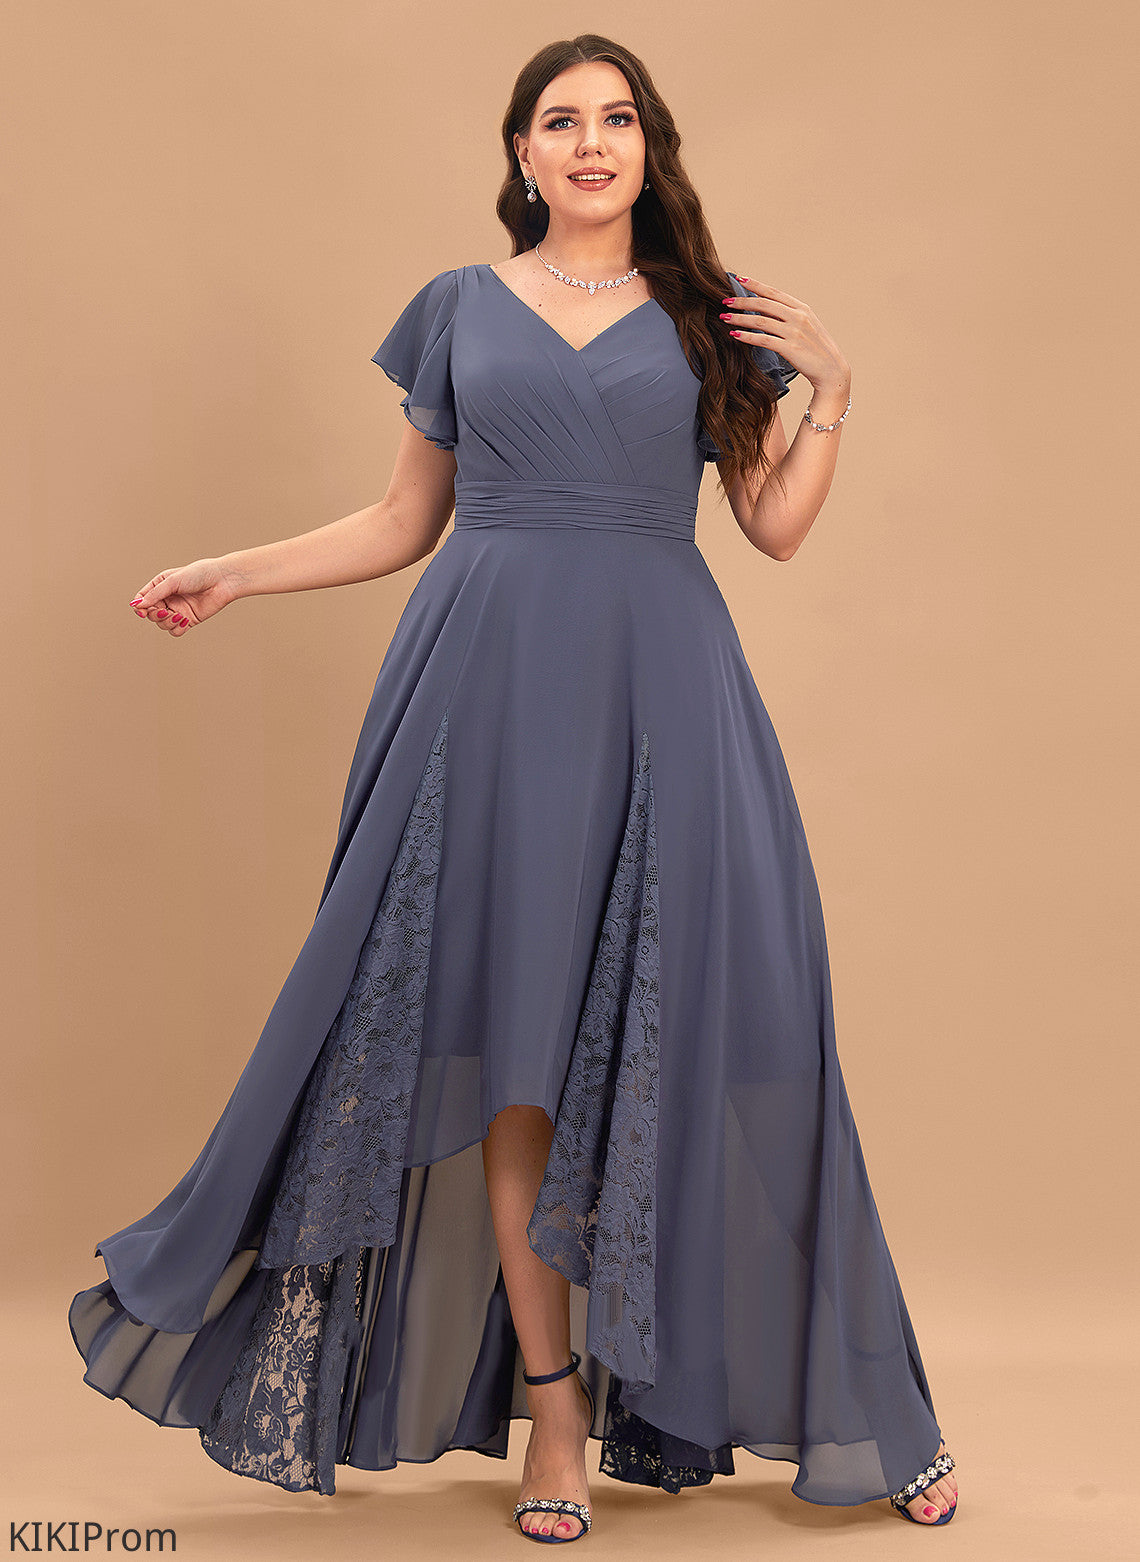 Dress Chiffon Lace With Asymmetrical A-Line Taniyah V-neck Ruffle Cocktail Cocktail Dresses